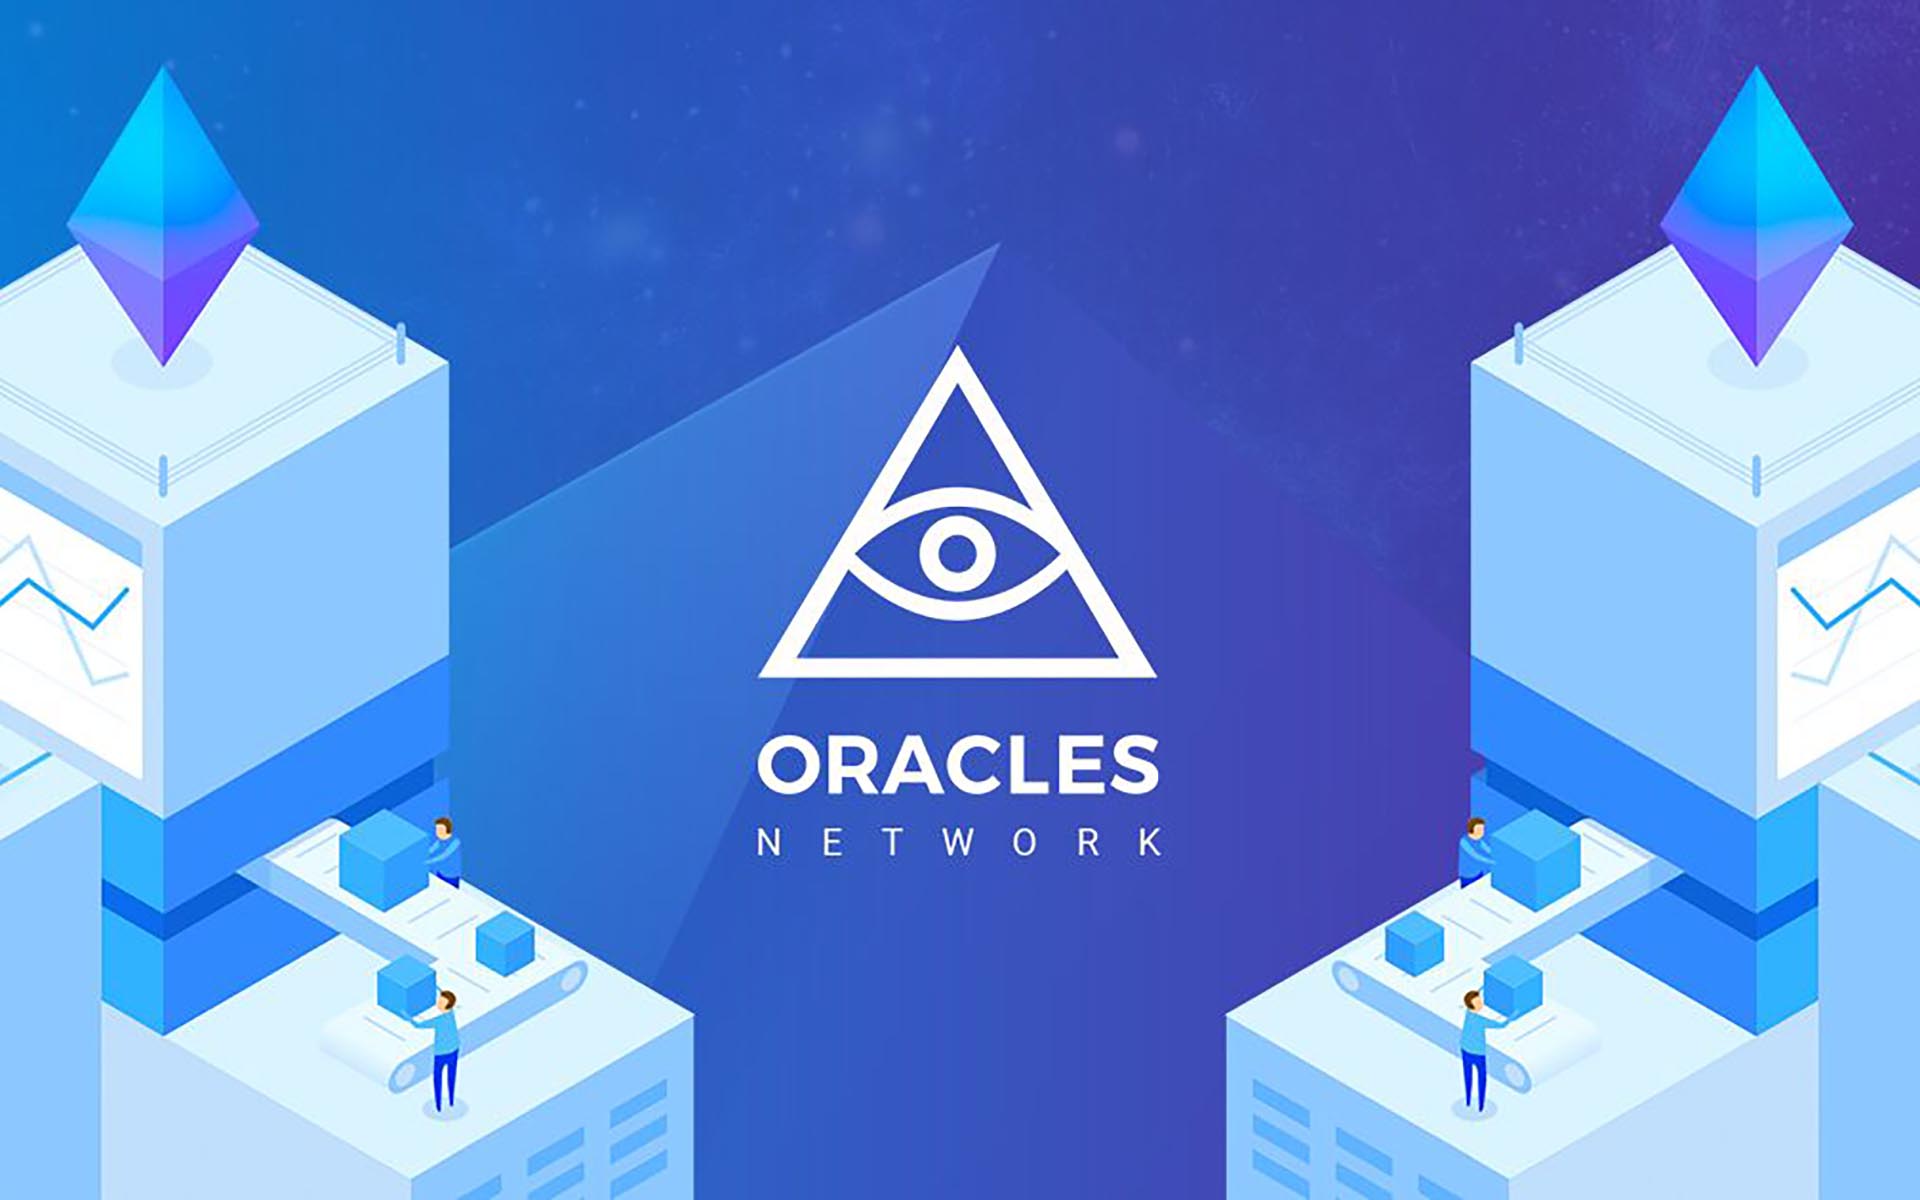 Oracles Network Introduces First Scalable Public Blockchain with Proof-of-Authority Consensus; Announces $25M Initial Coin Offering Starting in Q4